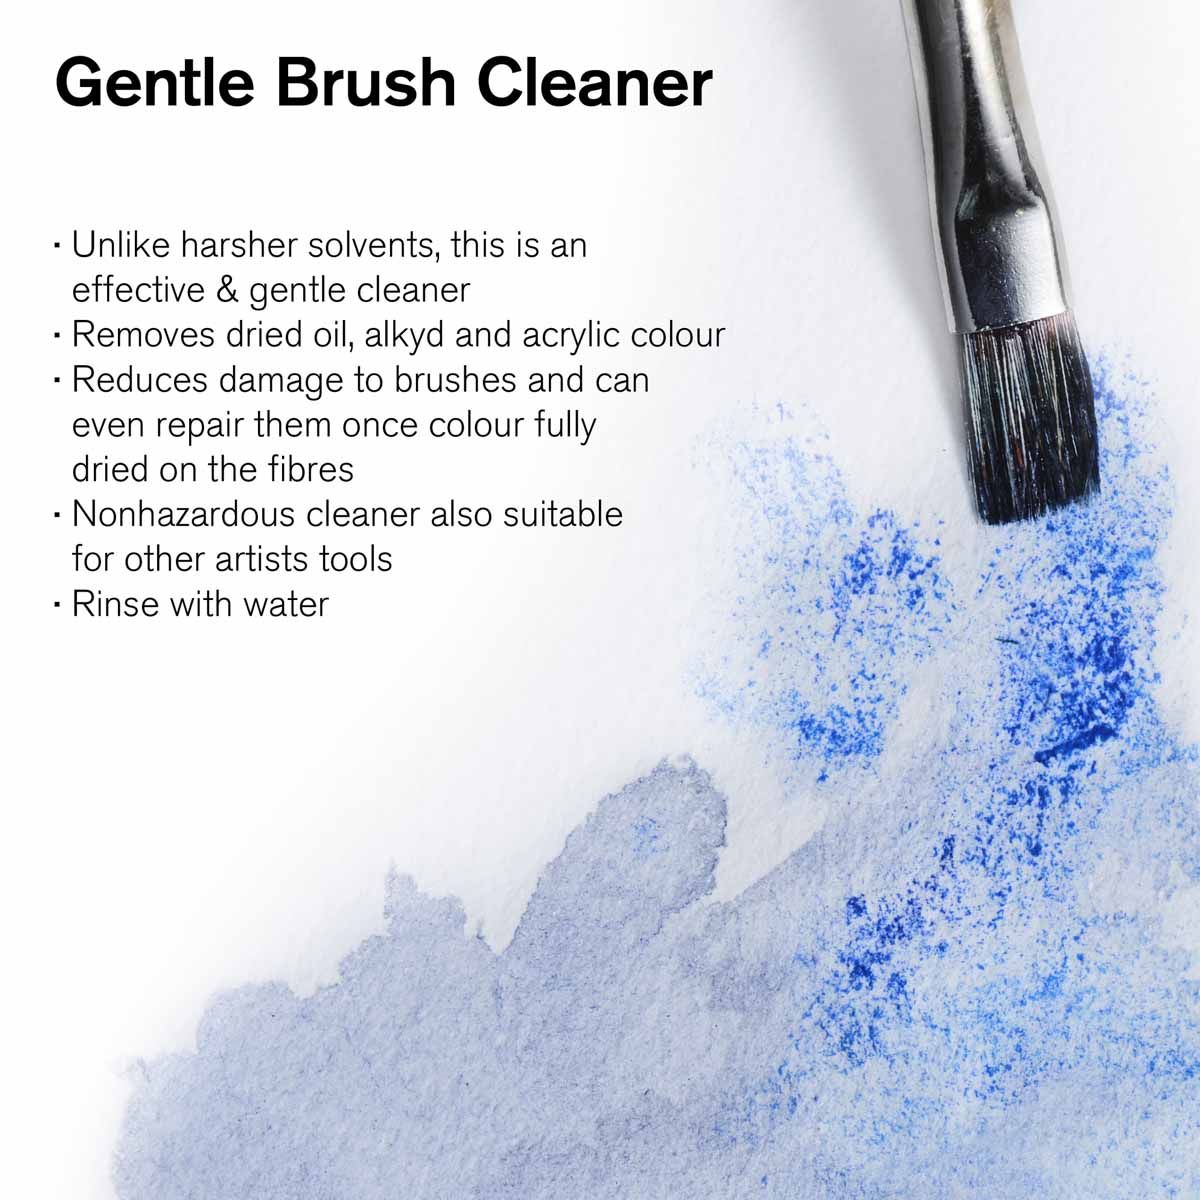 Effective and gentle cleaner